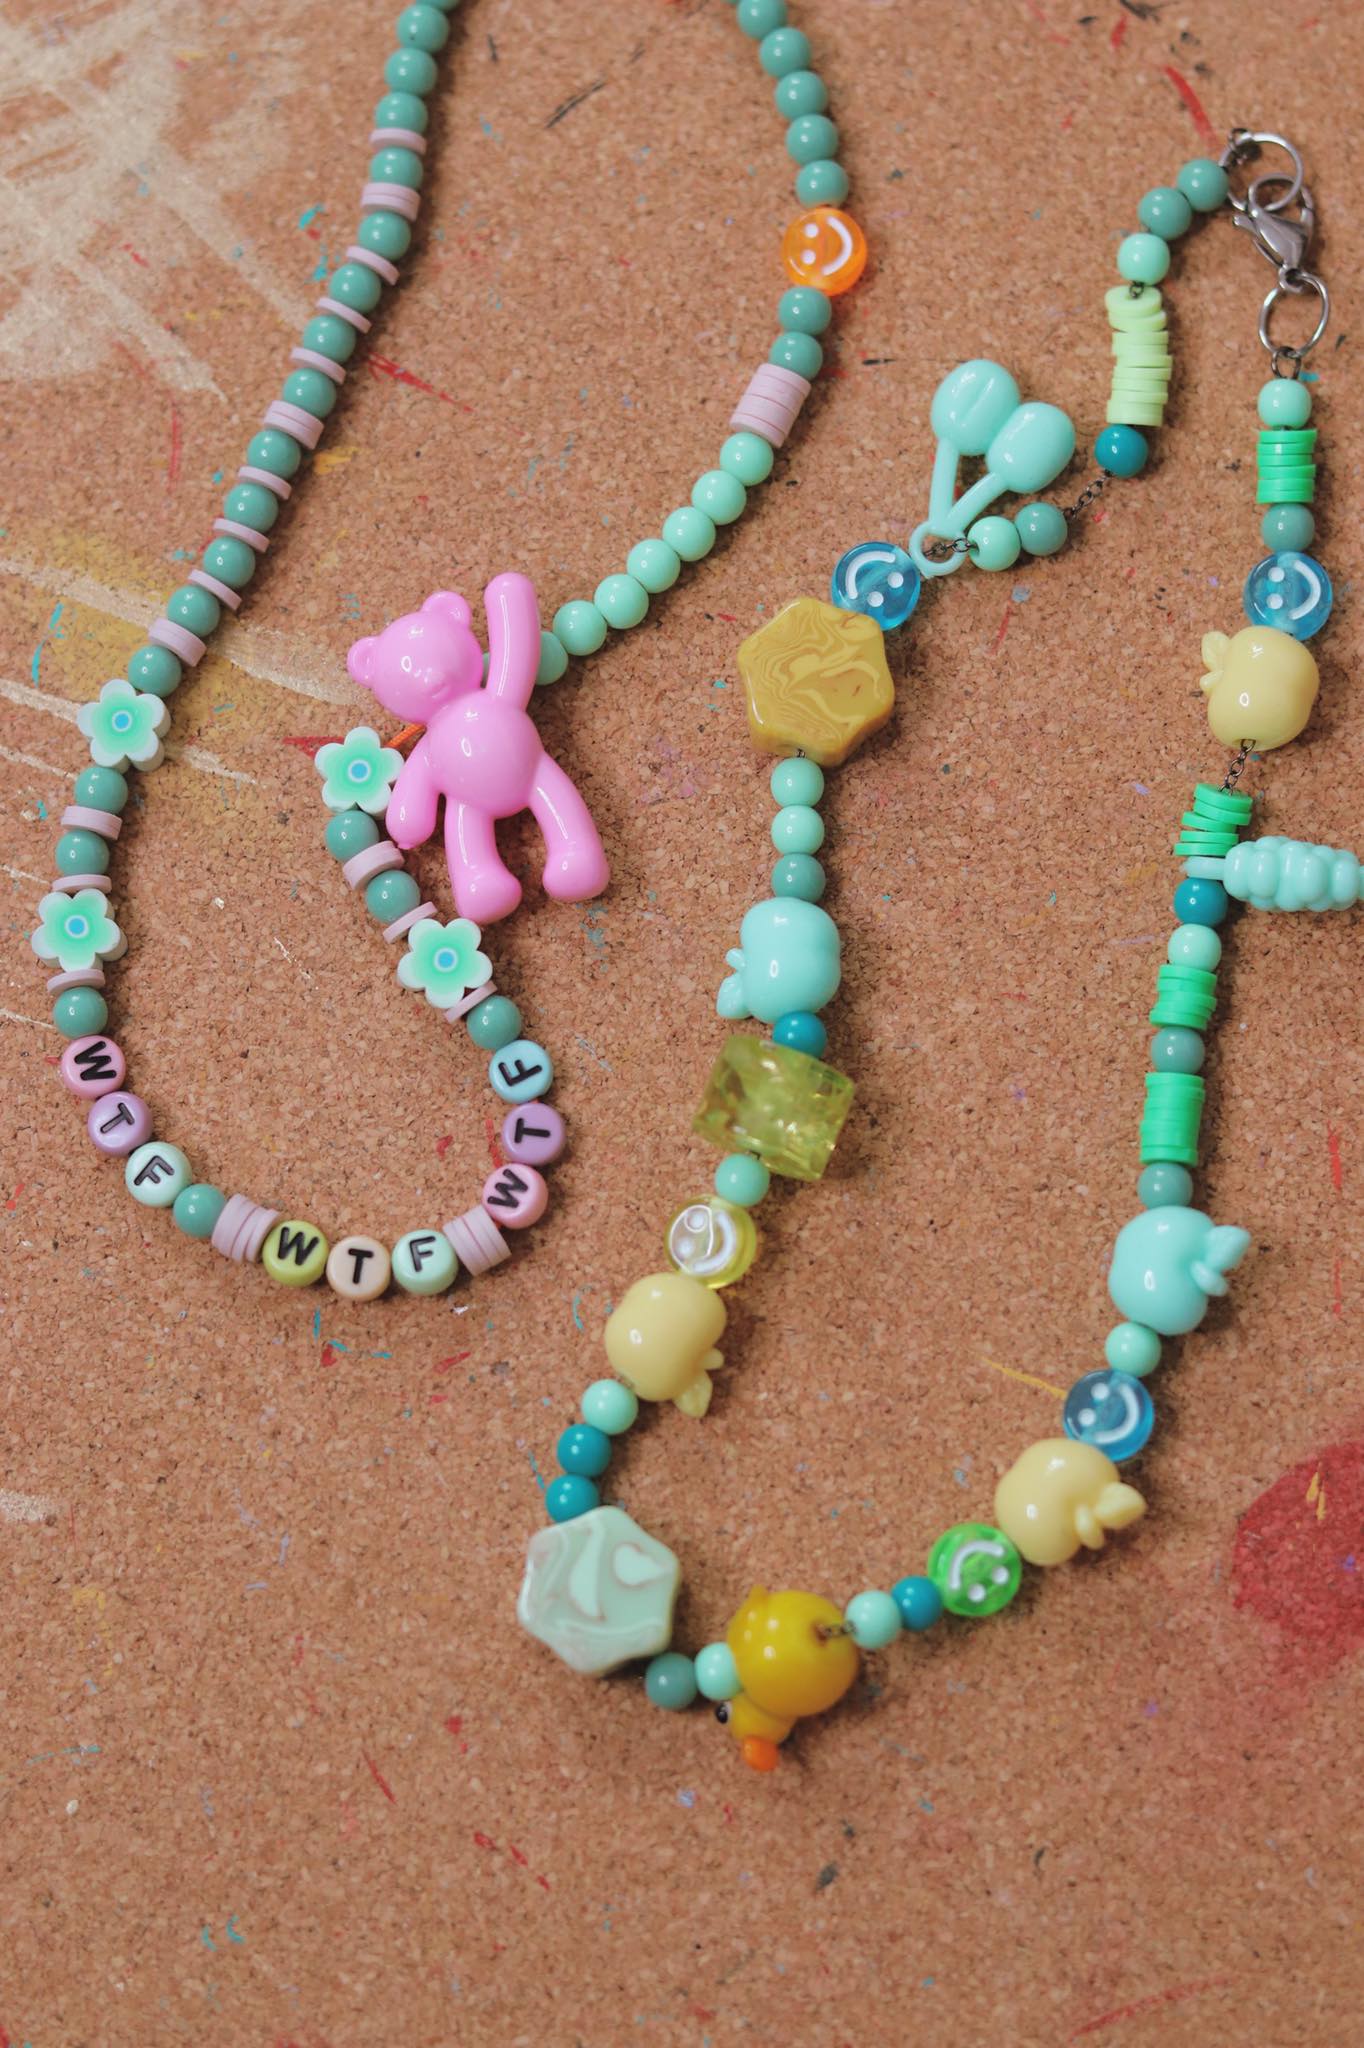 90'S INSPIRED BEADED NECKLACE WORKSHOP